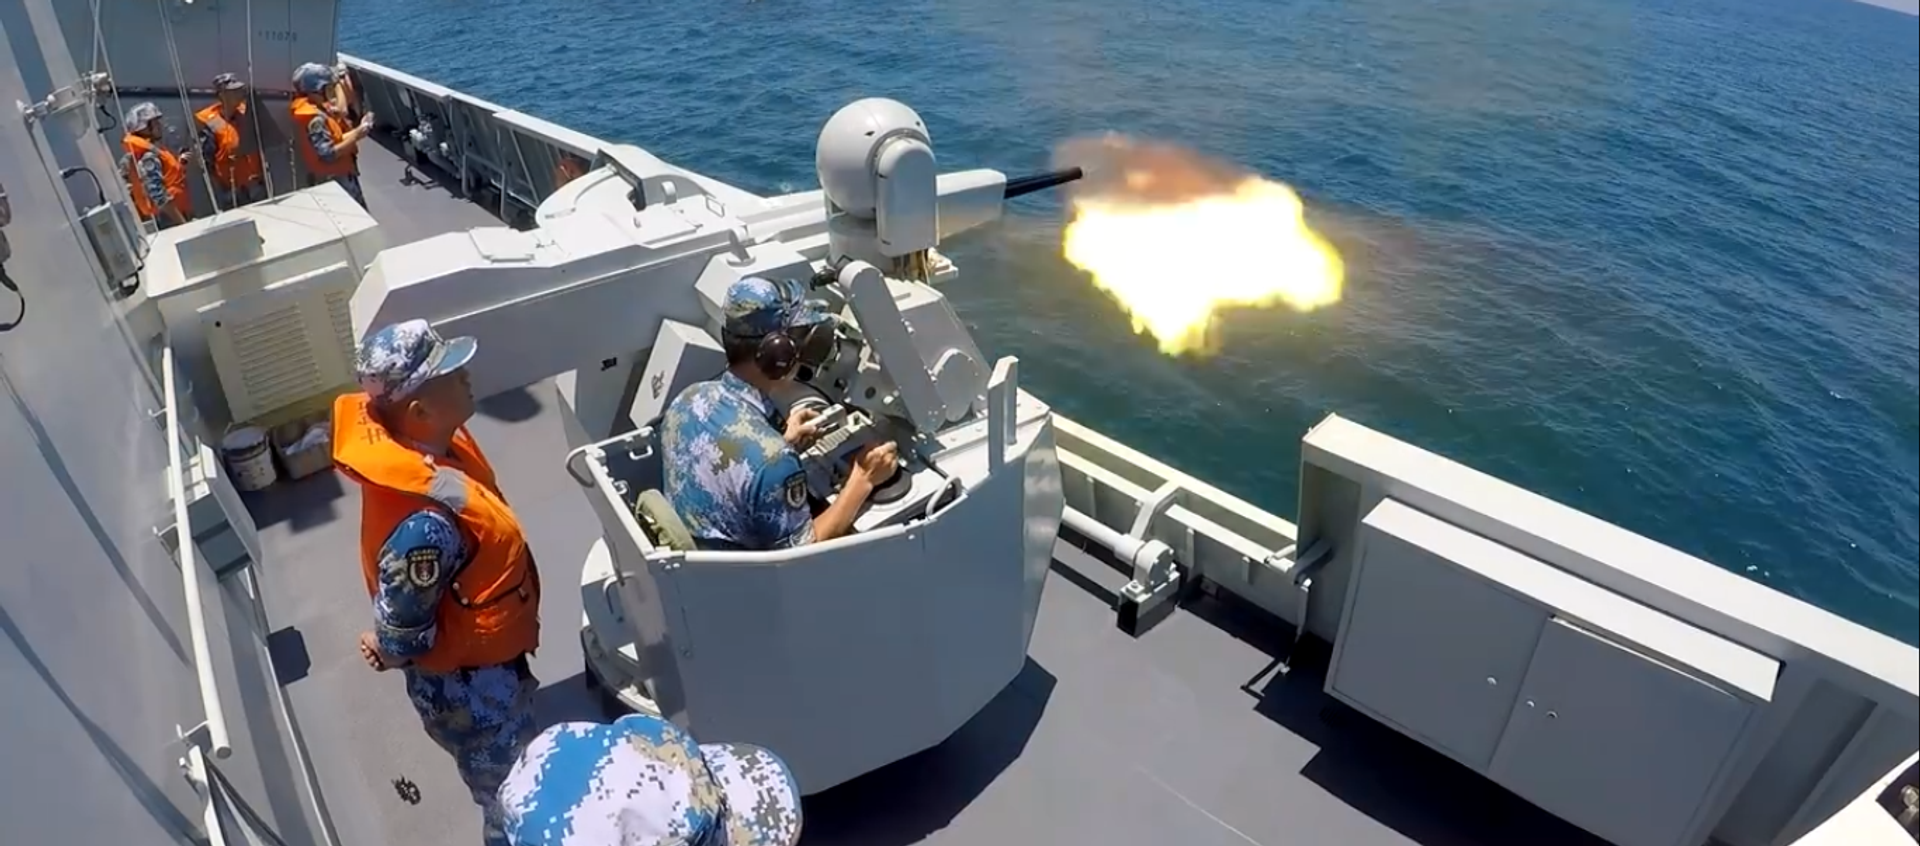 The Chinese corvette Huizhou fires one of its 30-millimeter cannons during live-fire drills in the South China Sea on August 15, 2020 - Sputnik International, 1920, 24.02.2021